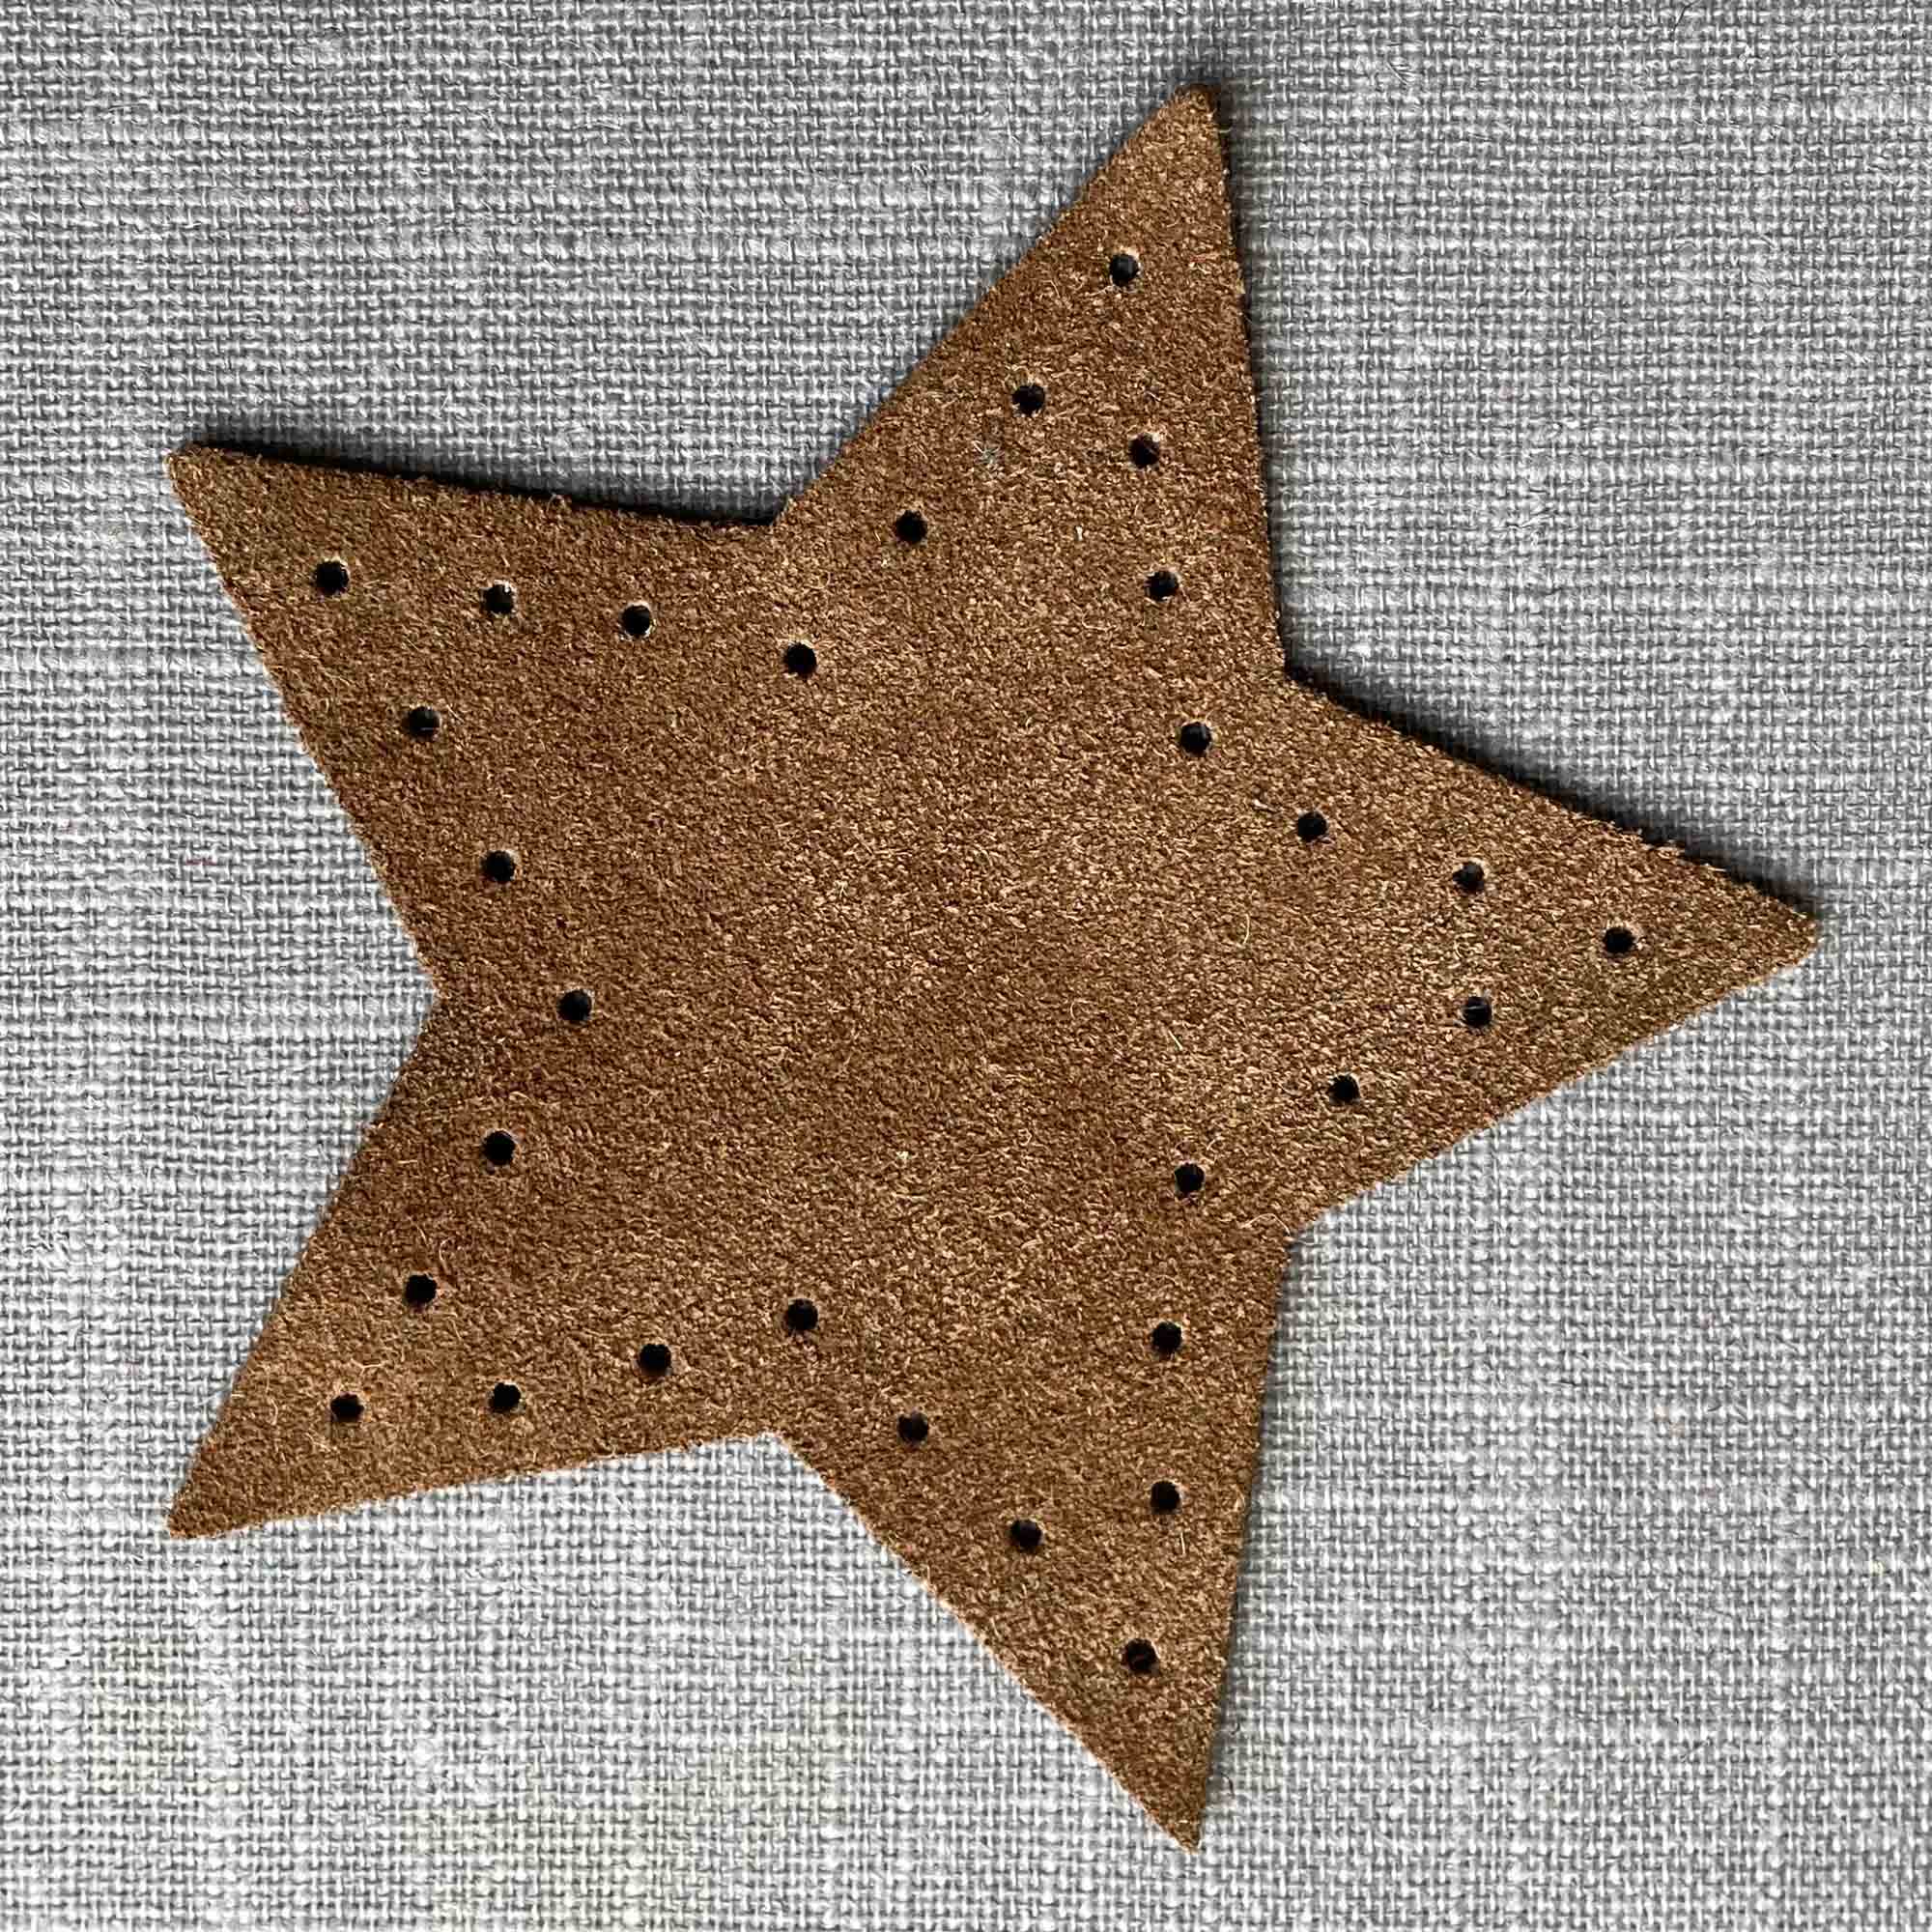 Big Suede Star Patches with punched holes – Joe's Toes US